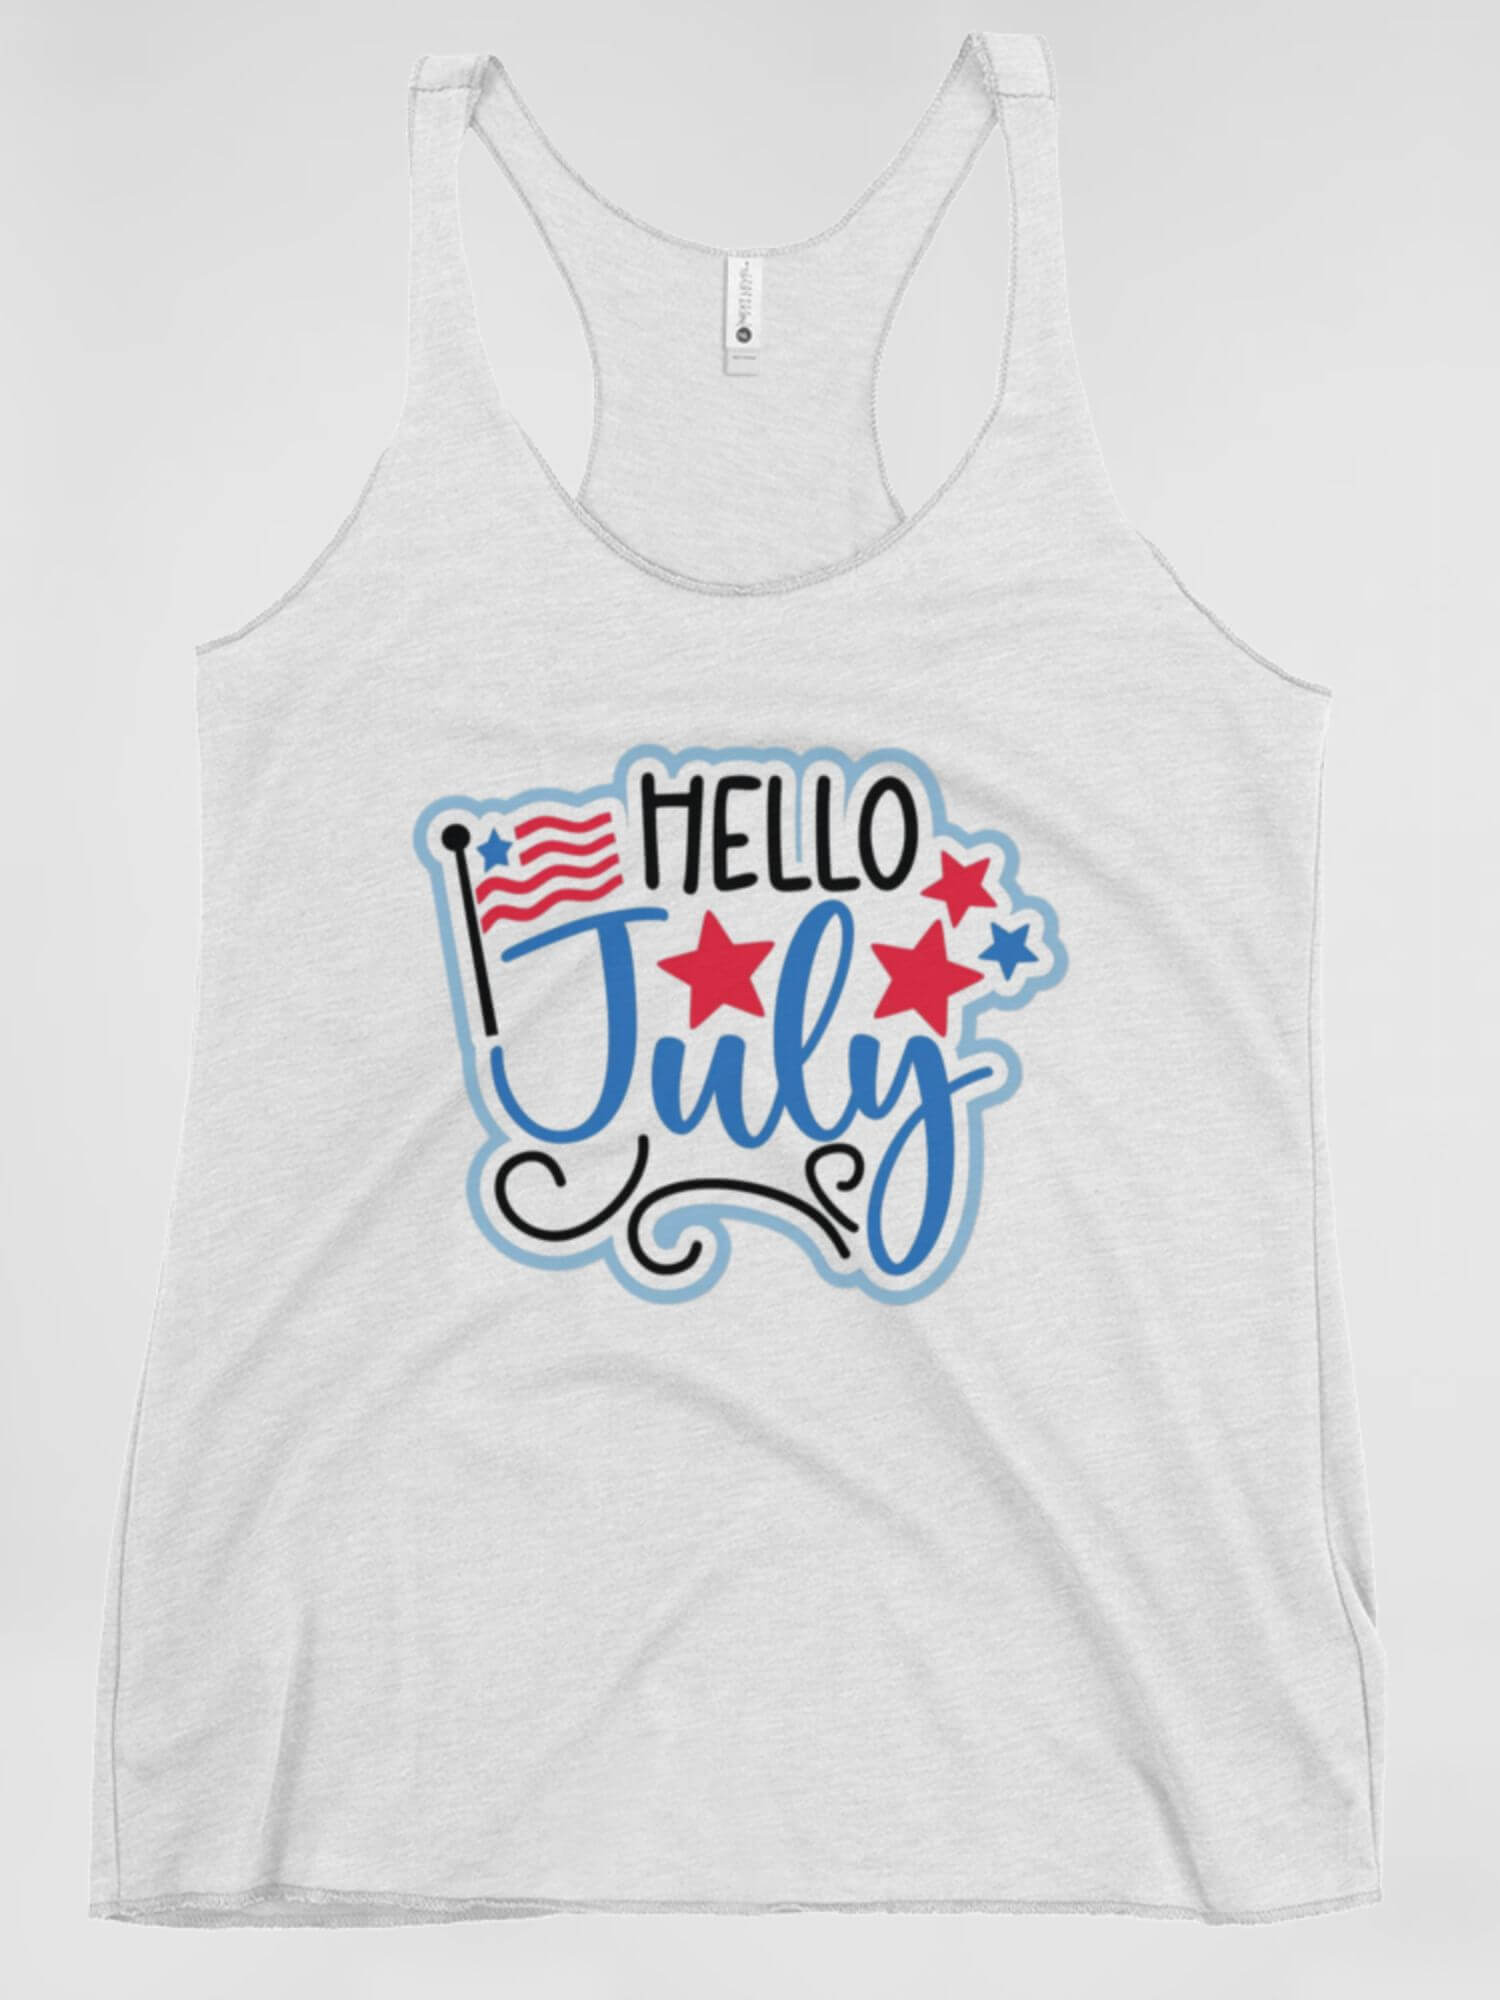 Graphic Racerback Tank Top     Unisex Anywear Hello July USA low v-neck Men’s Women’s sleeveless scoopneck tops T-shirts for tall plus size man woman in white with multicolor pattern MiteigiYūki fitness gym running sports mens womens low neck tees tops American months of the year in white with blue and red design United States Of America  sportswear